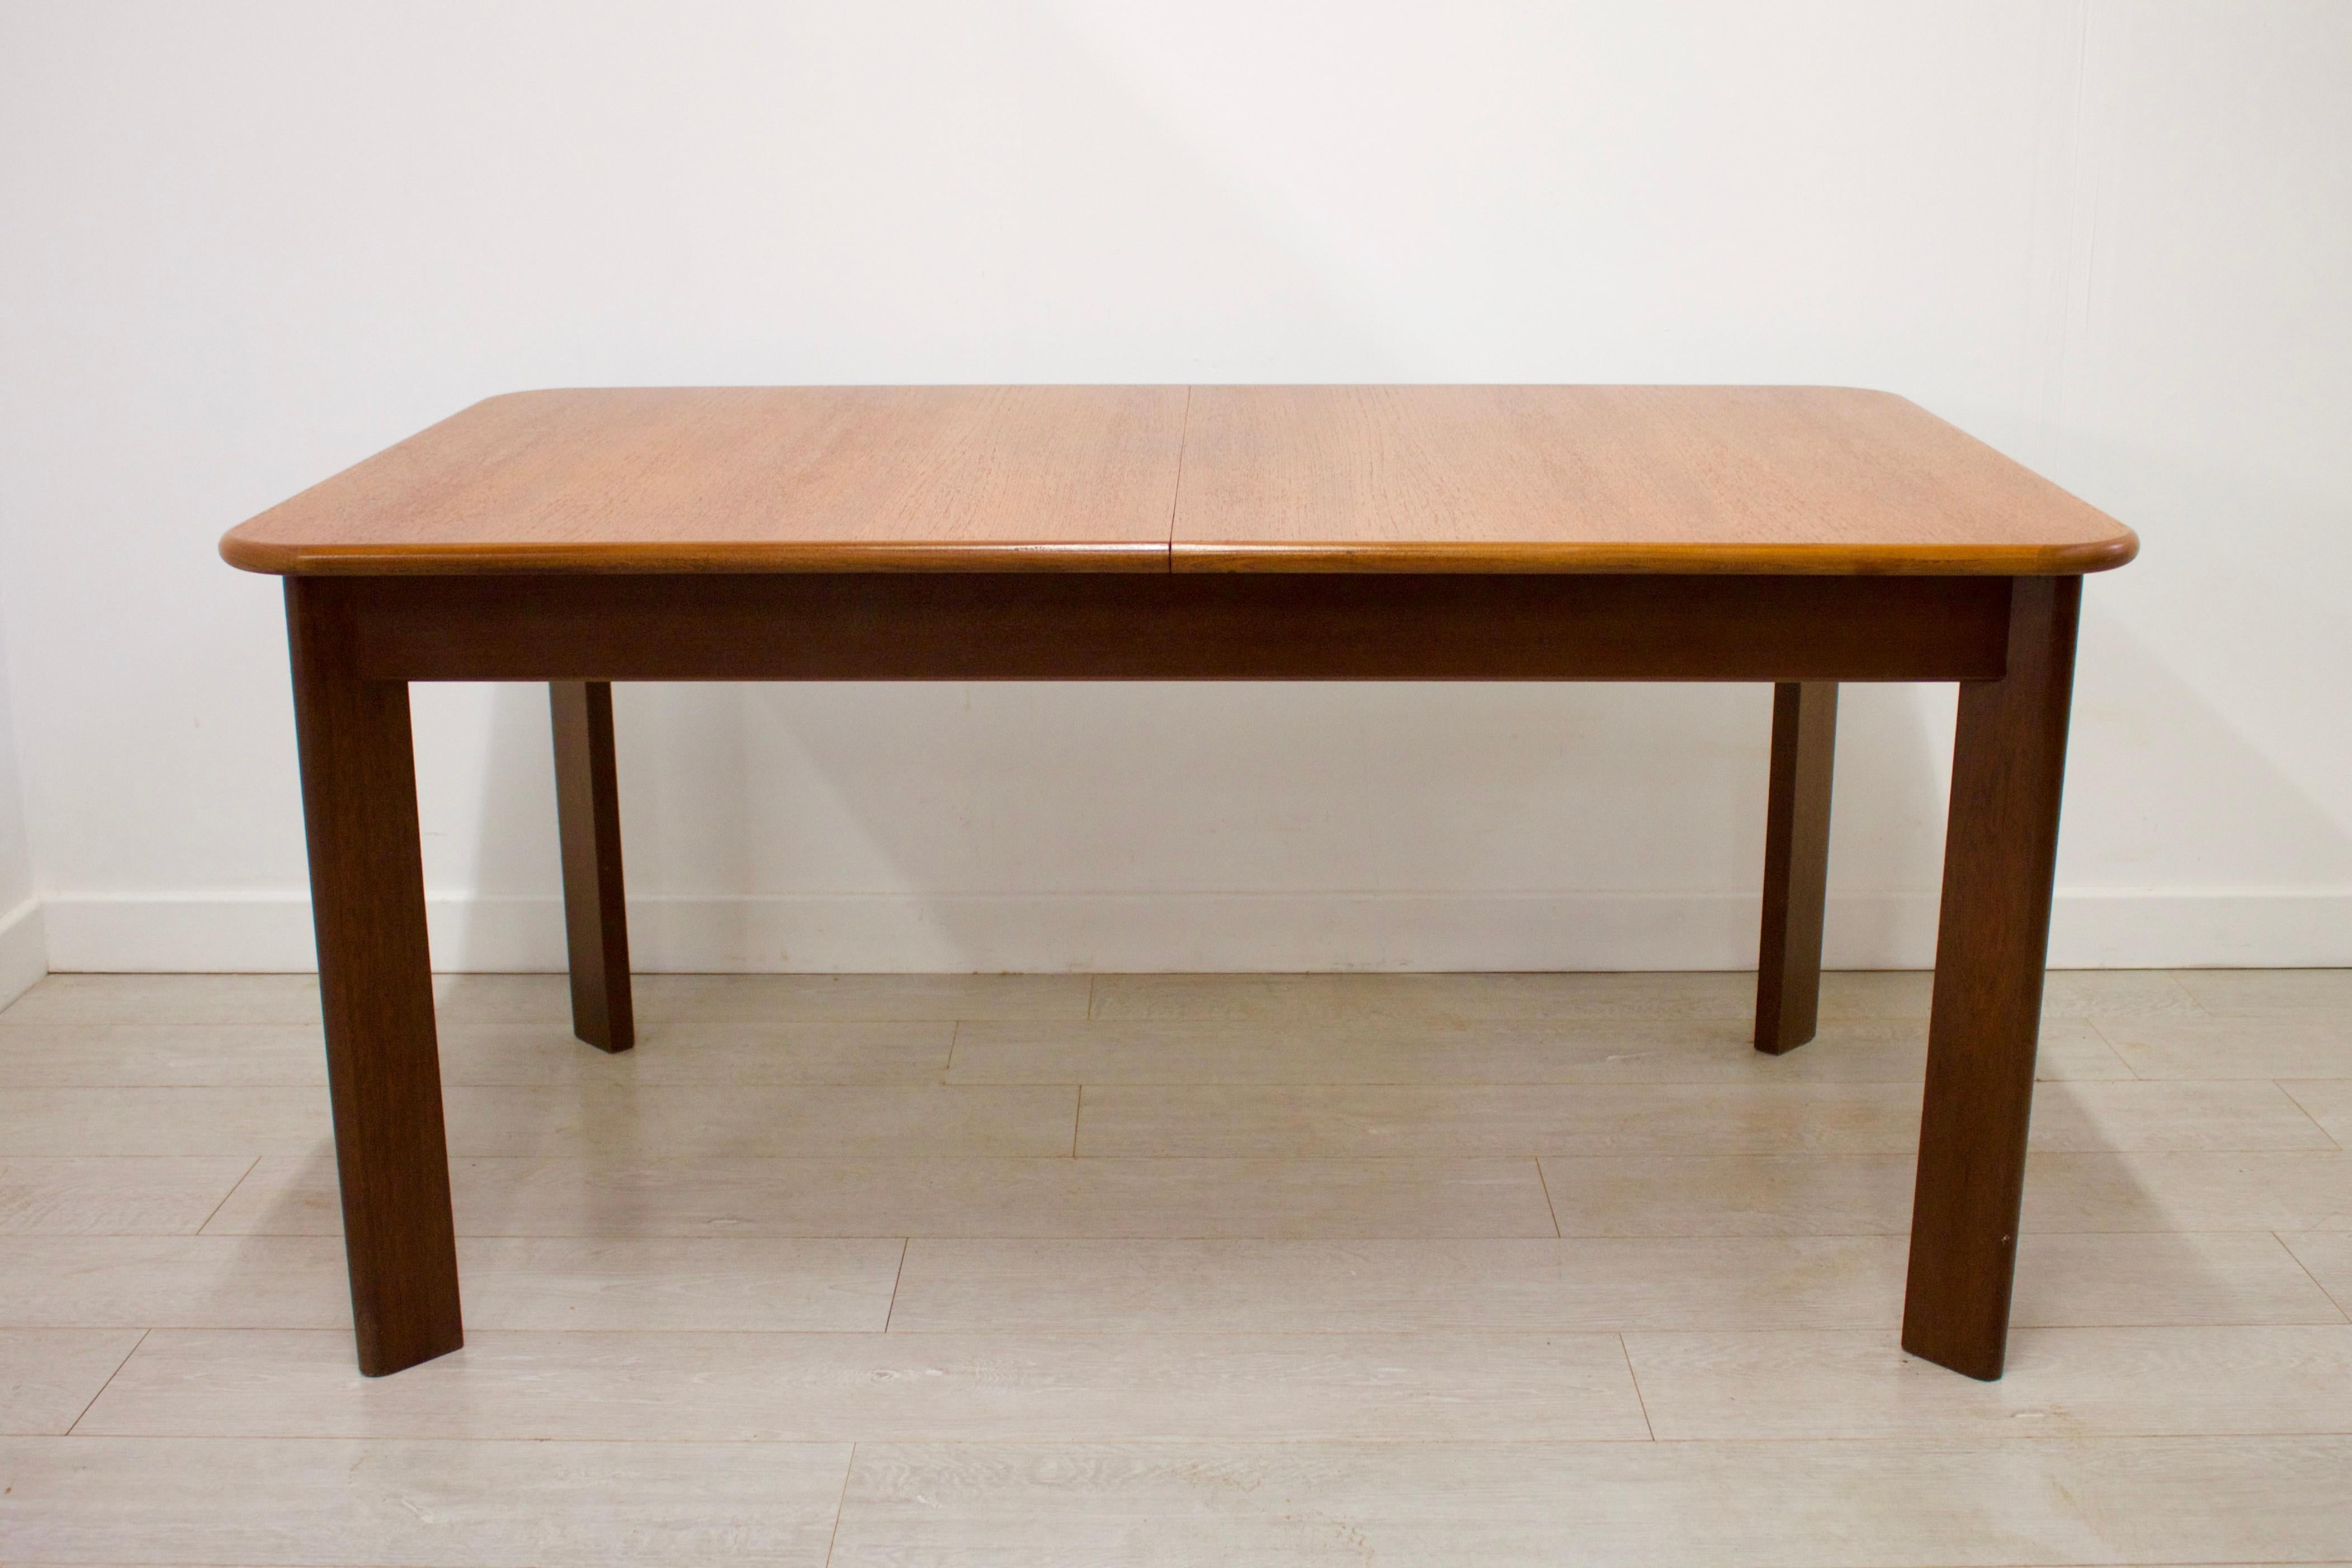 Midcentury Teak Extending Dining Table by G-Plan, 1970s In Good Condition For Sale In South Shields, Tyne and Wear